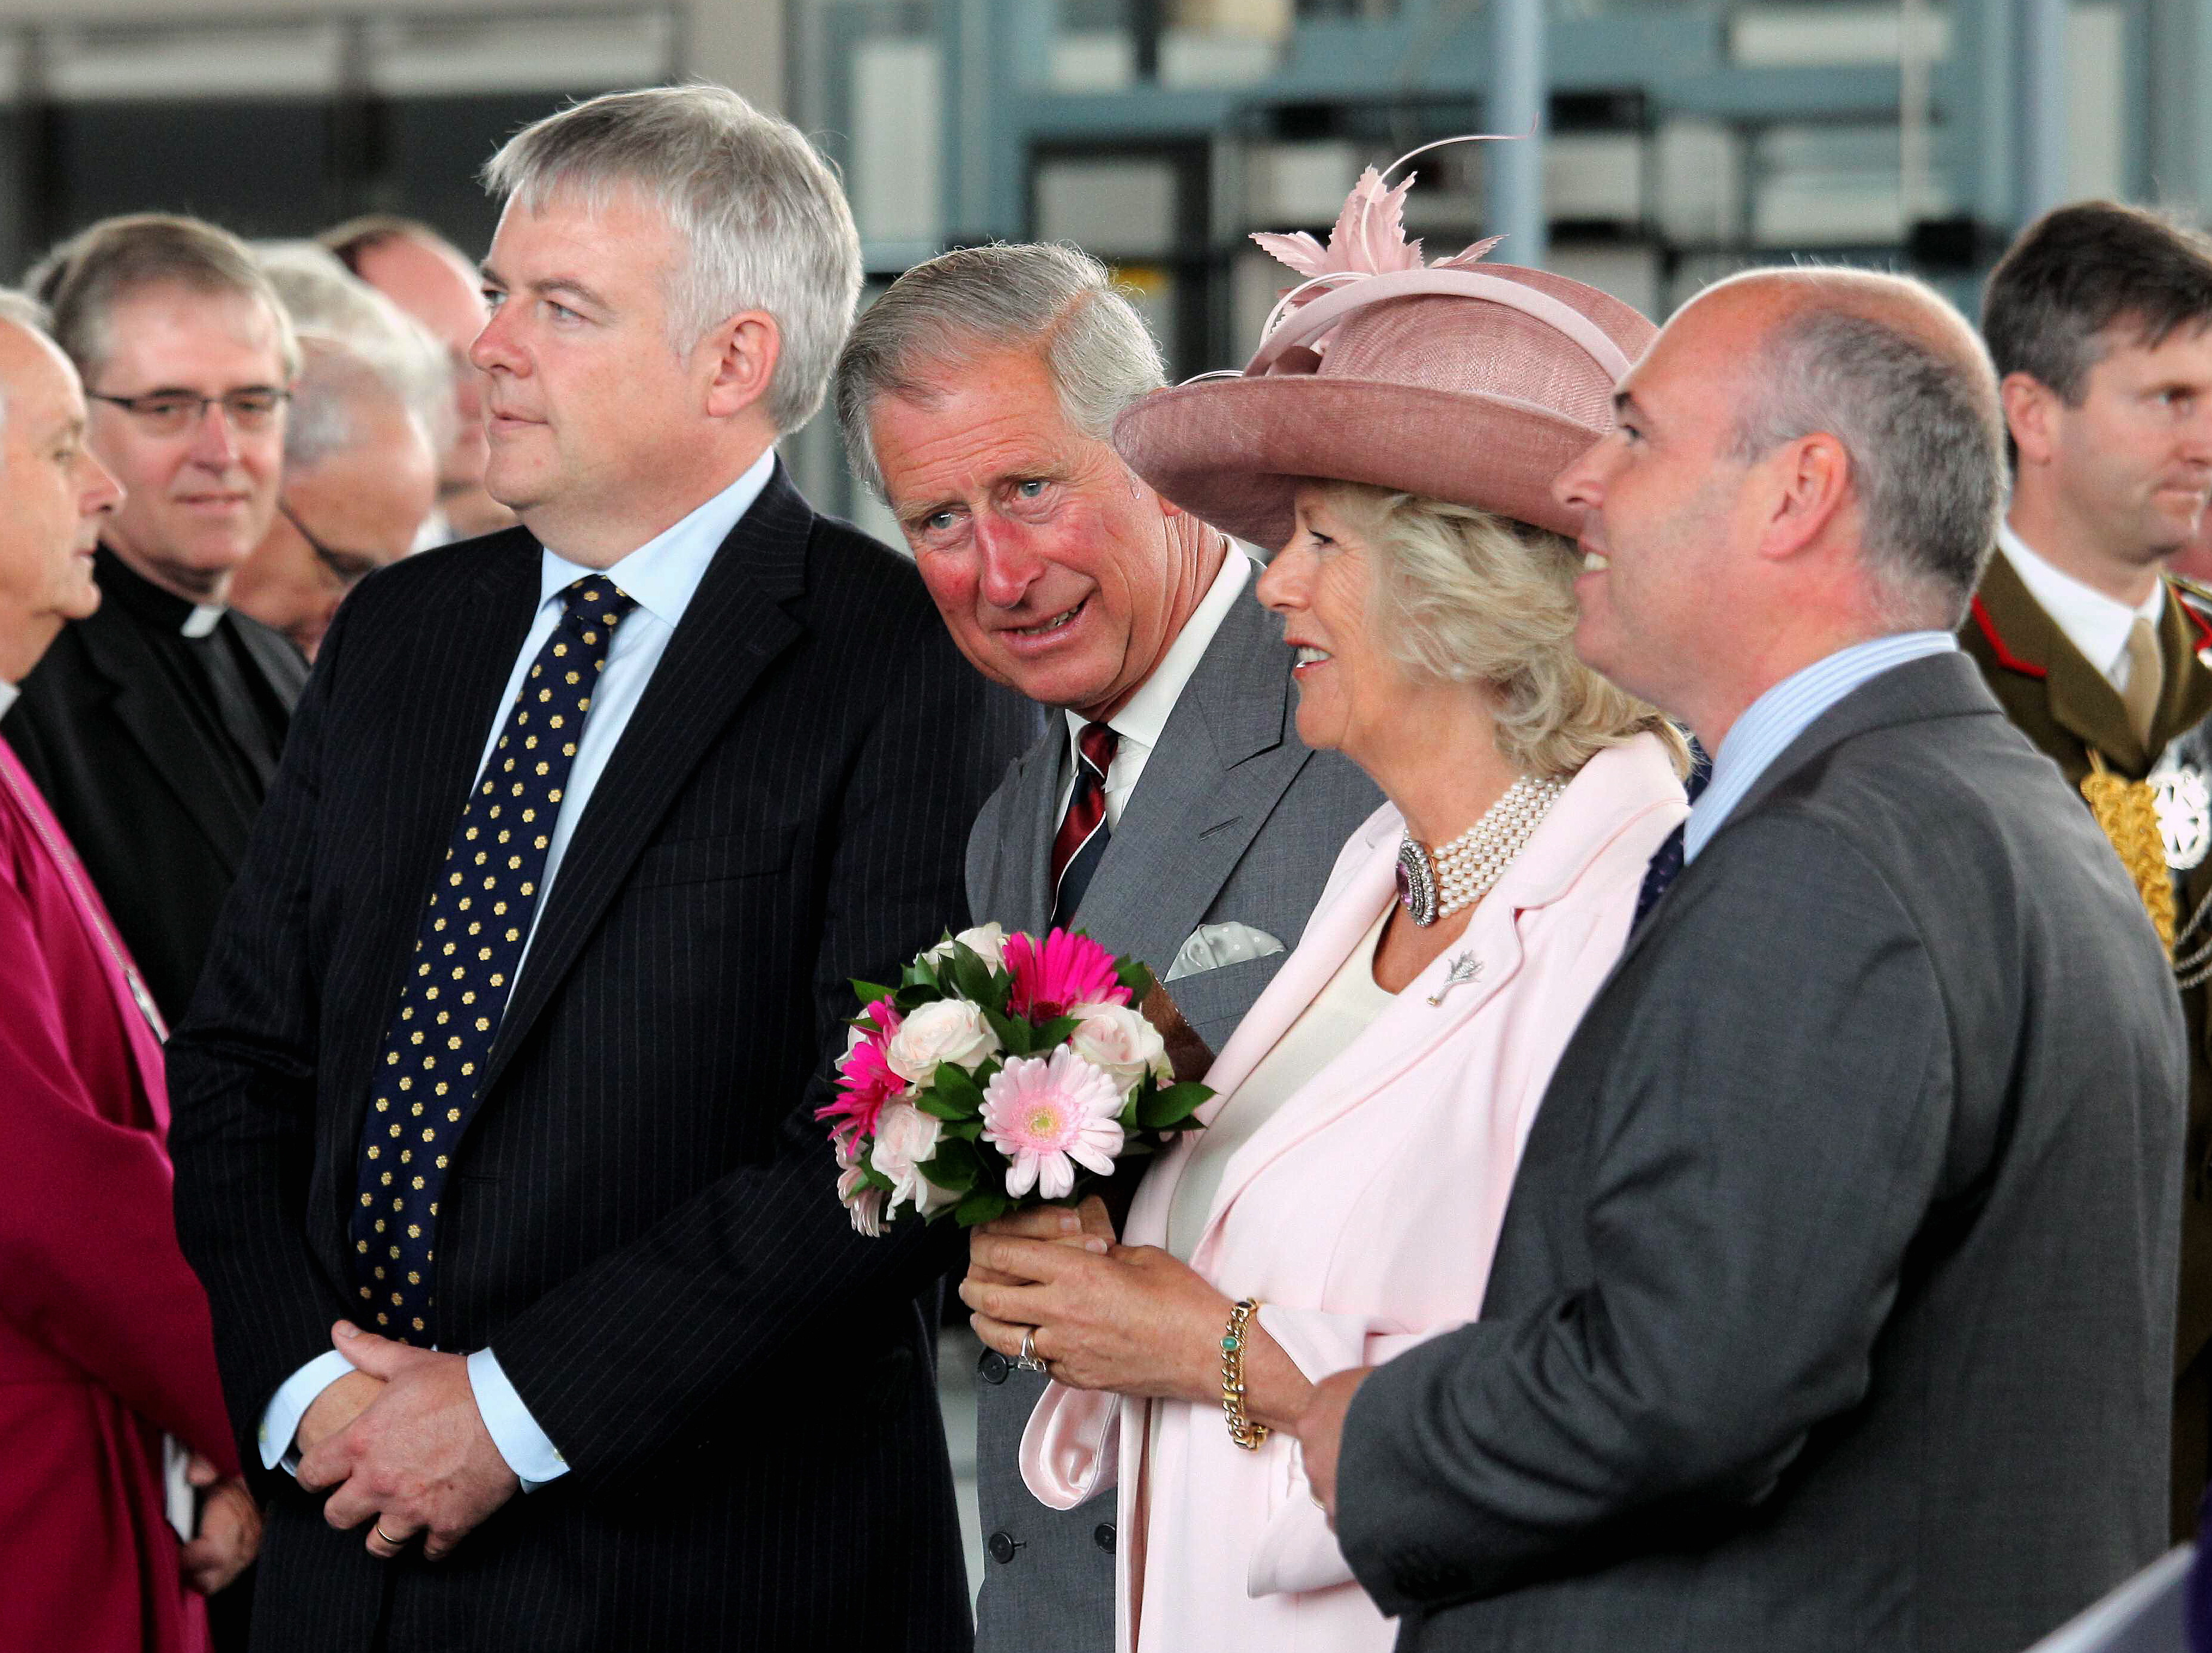 Pictured L-R: First Minister for Wales Carwyn Jones with Prince Charles and Camilla, the Duchess of Cornwall. Re: HRH The Queen Elizabeth accompanied by her husband, Philip, The Duke of Edinburgh and Charles The Prince of Wales and his wife Camilla, The Duchess of Cornwall, visiting the Welsh Assembly Parliament in Cardiff Bay. Tuesday 07 June 2011